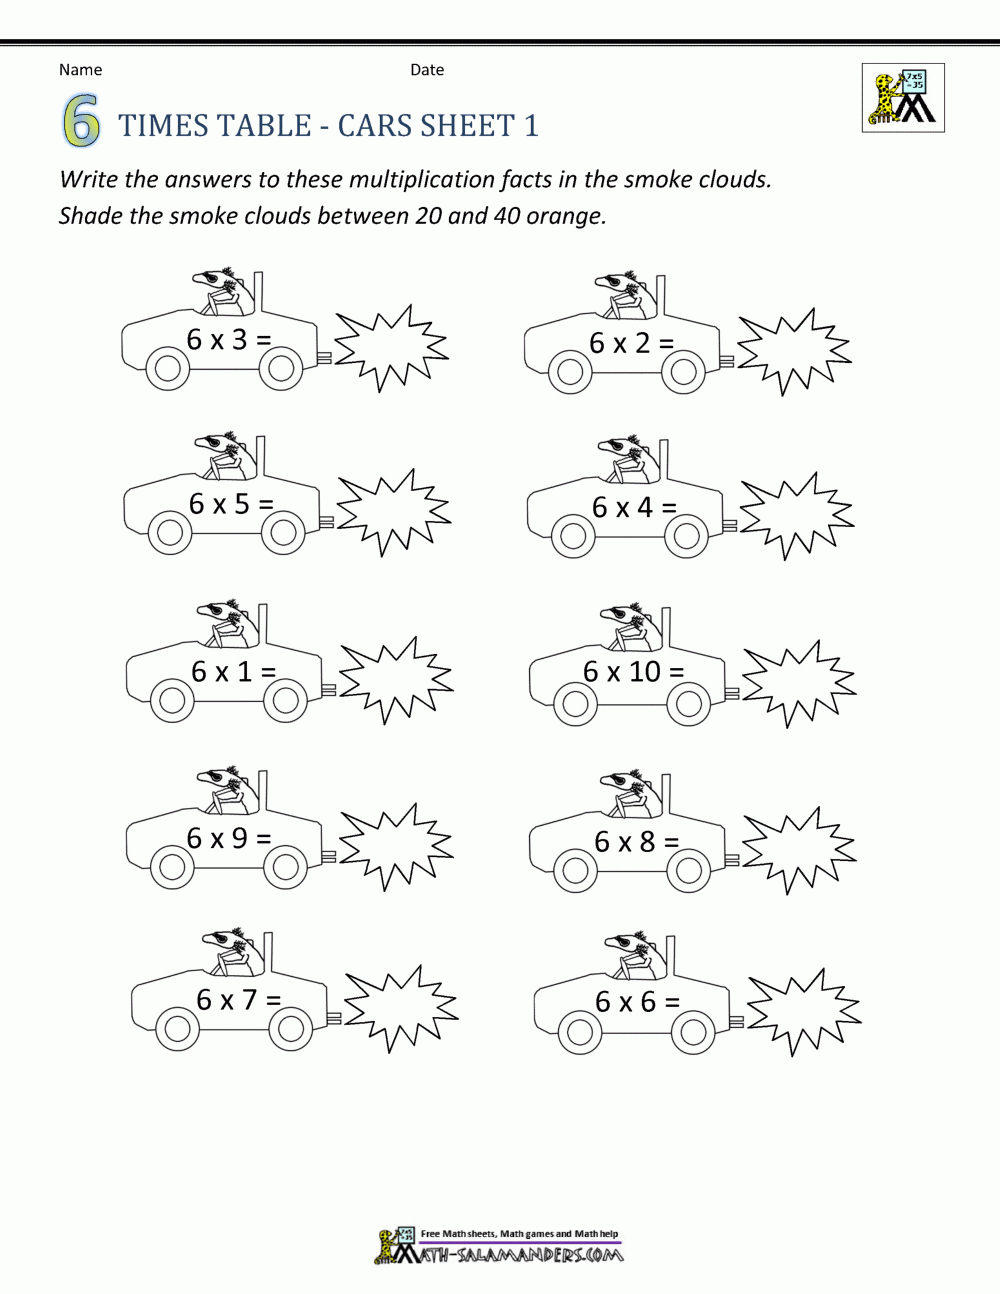 Times Table Worksheets - 6 Times Table Sheets with Printable Multiplication By 6